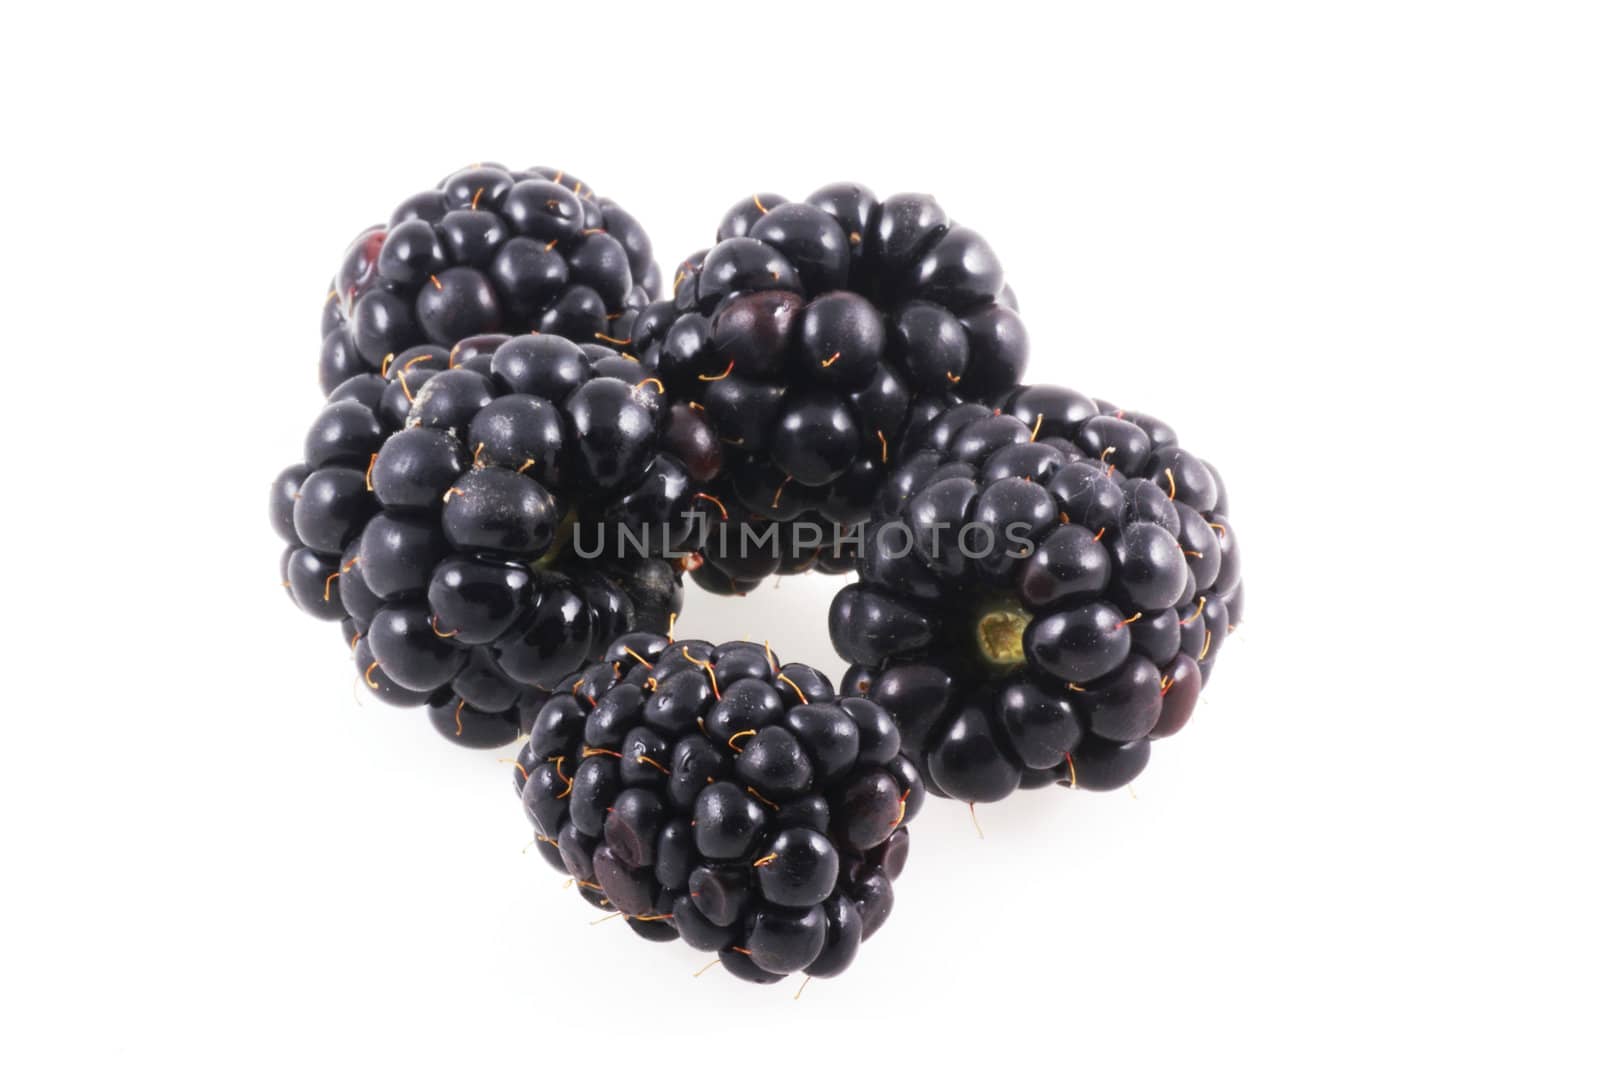 Blackberries isolated on a white background.